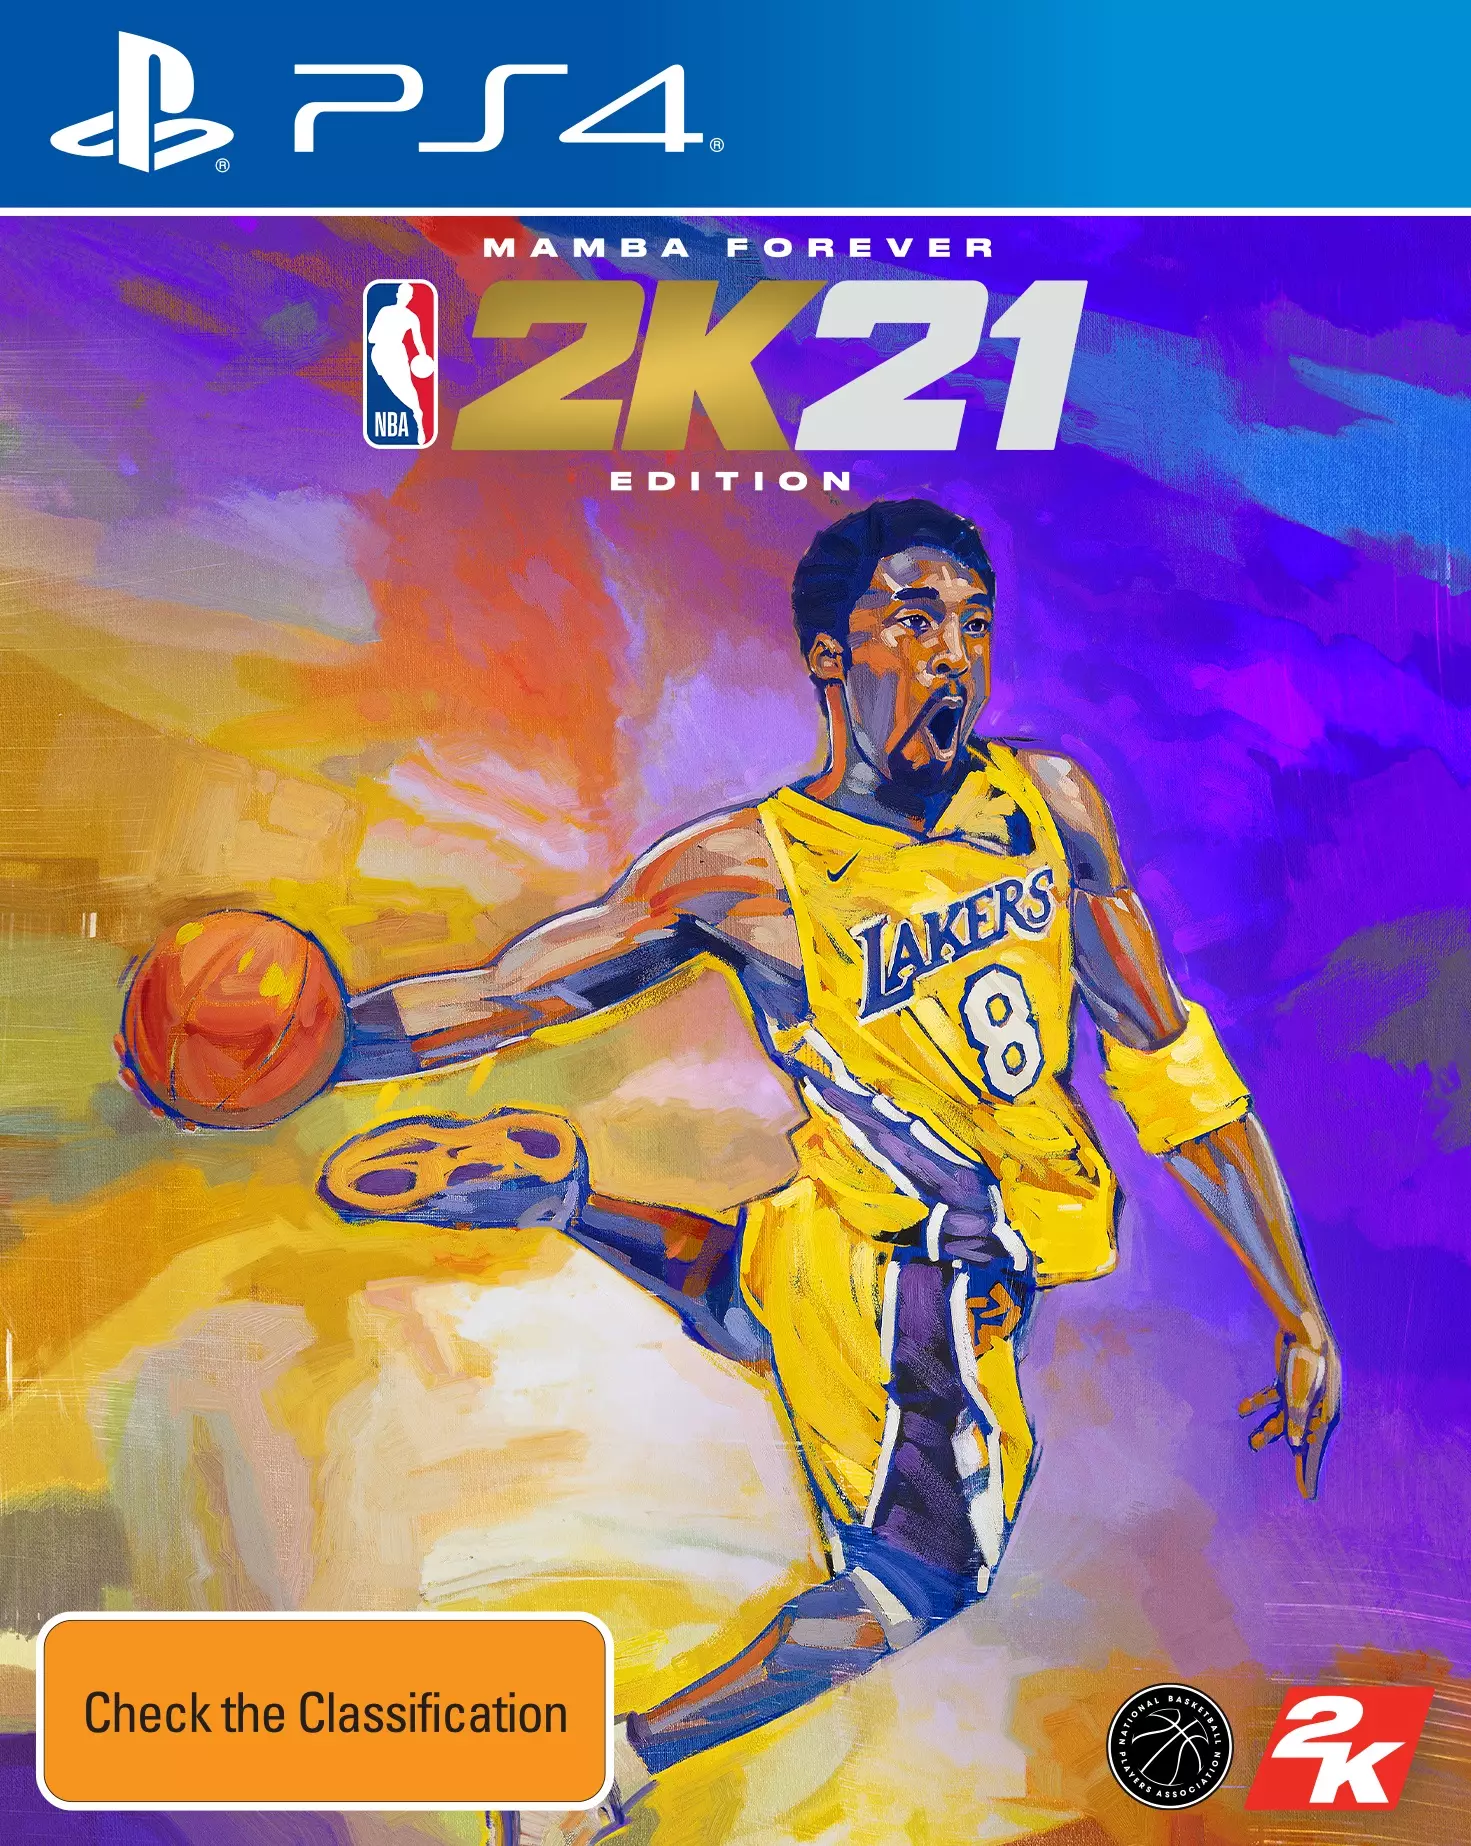 The NBA 2K21 Mamba Forever Edition is also available for purchase.